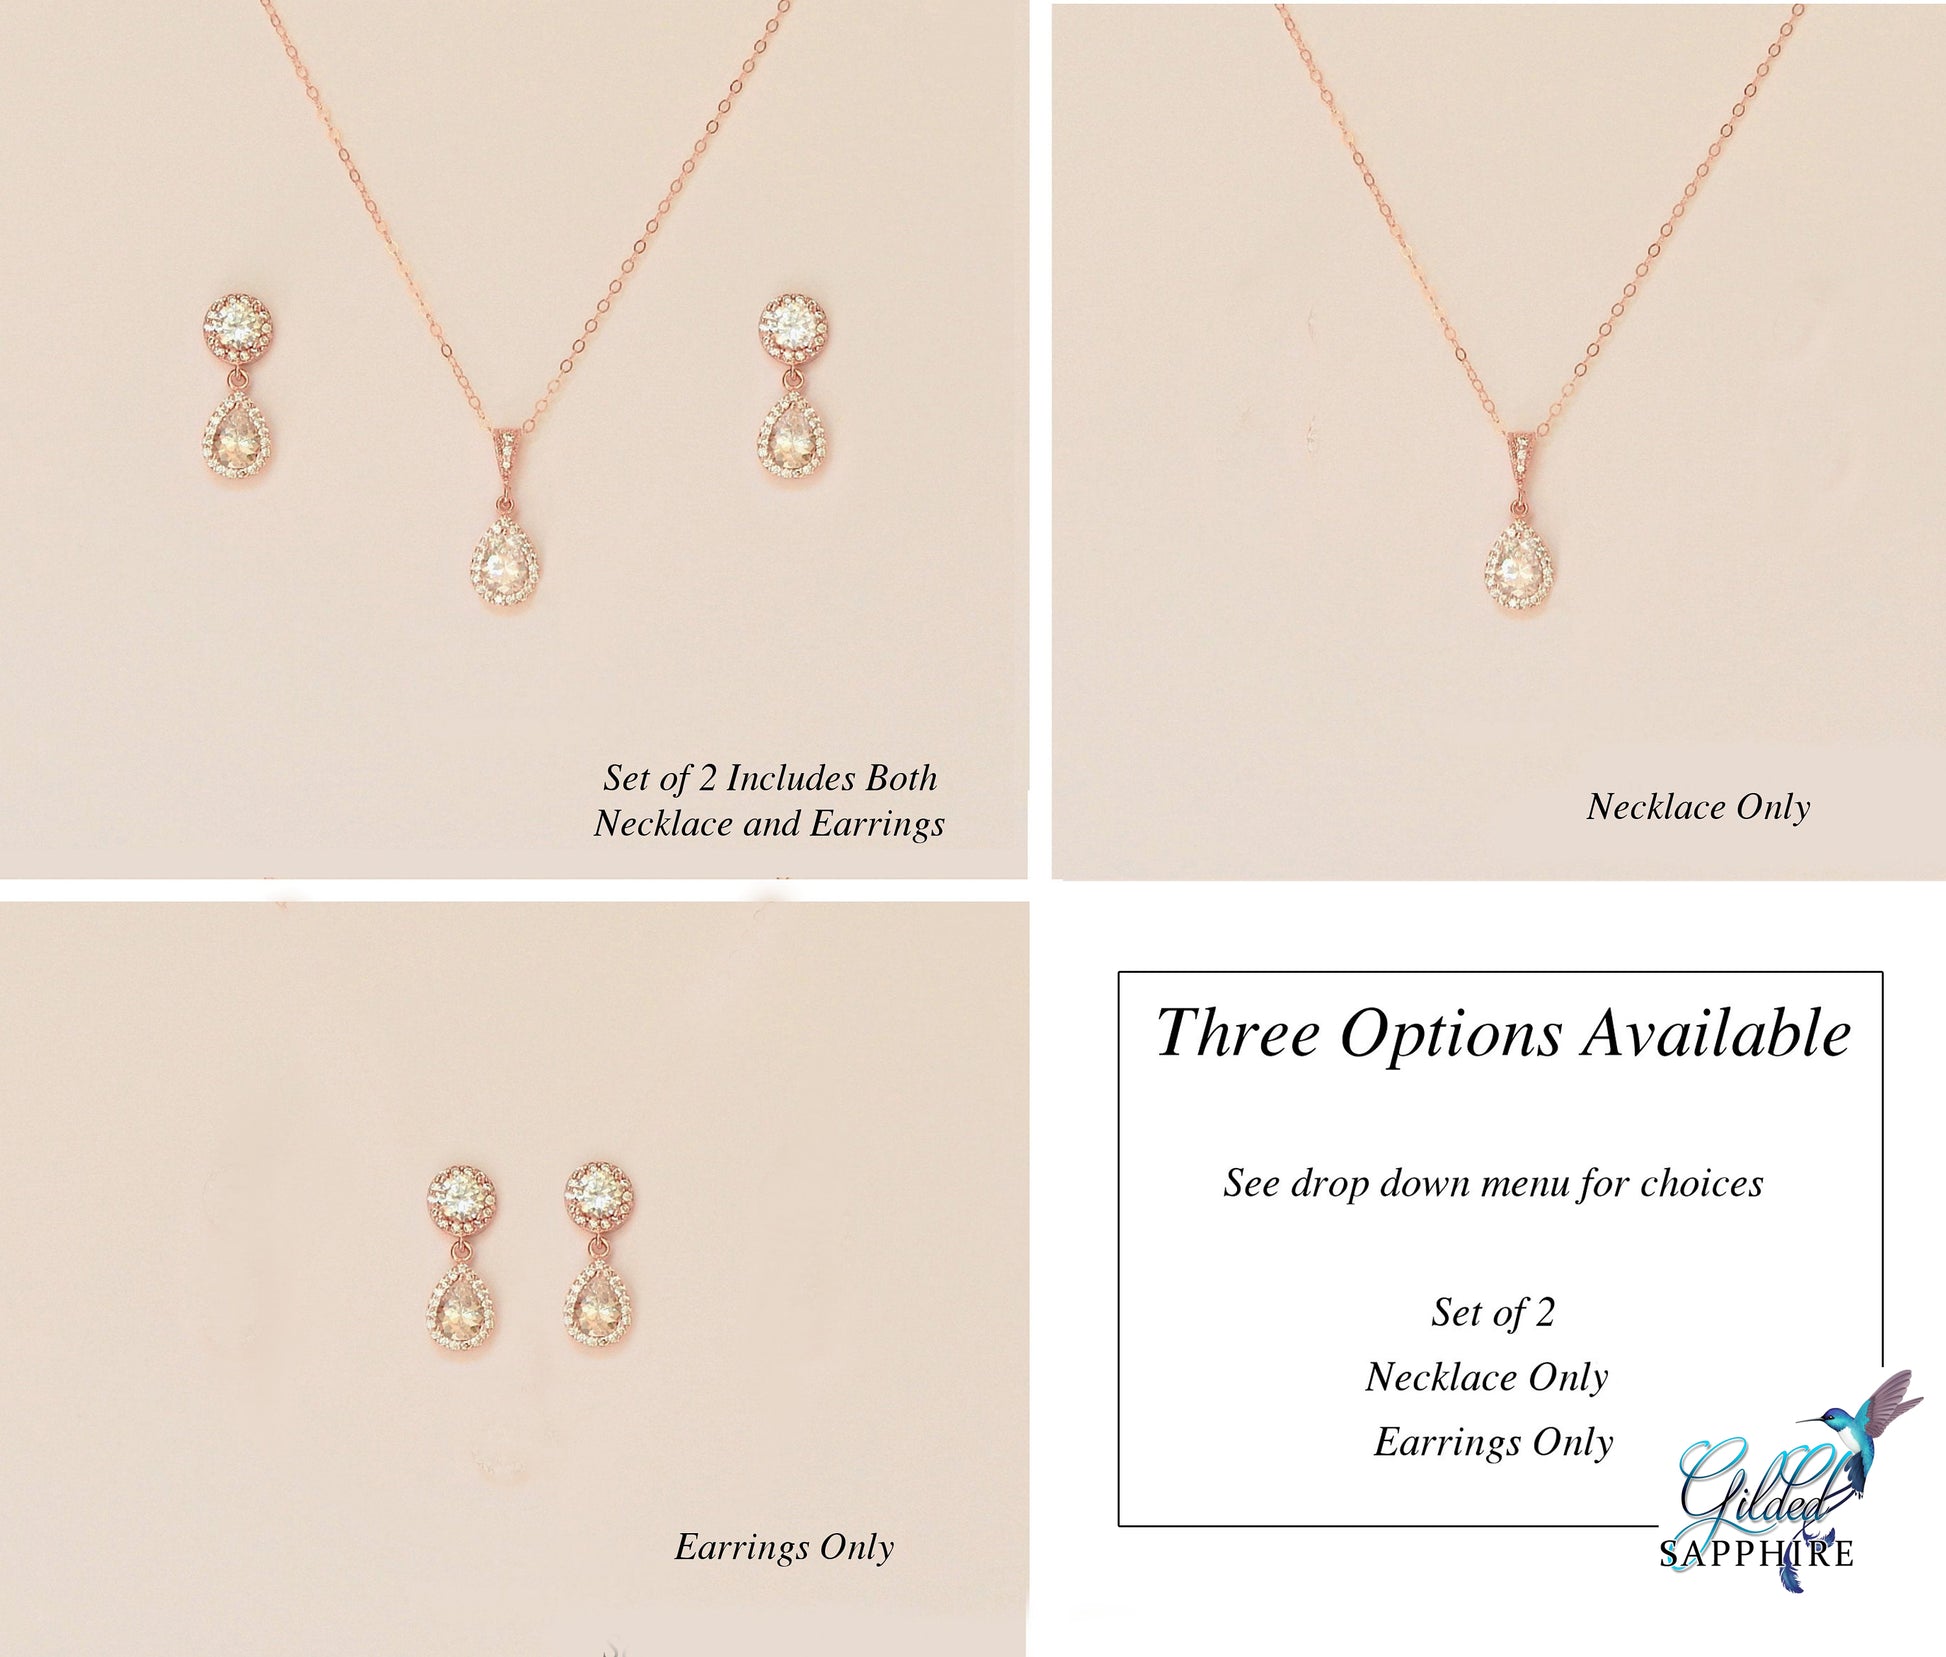 Rose gold bridal necklace and earring set by Gilded Sapphire on a blank background with 3 different ways to wear the jewelry.